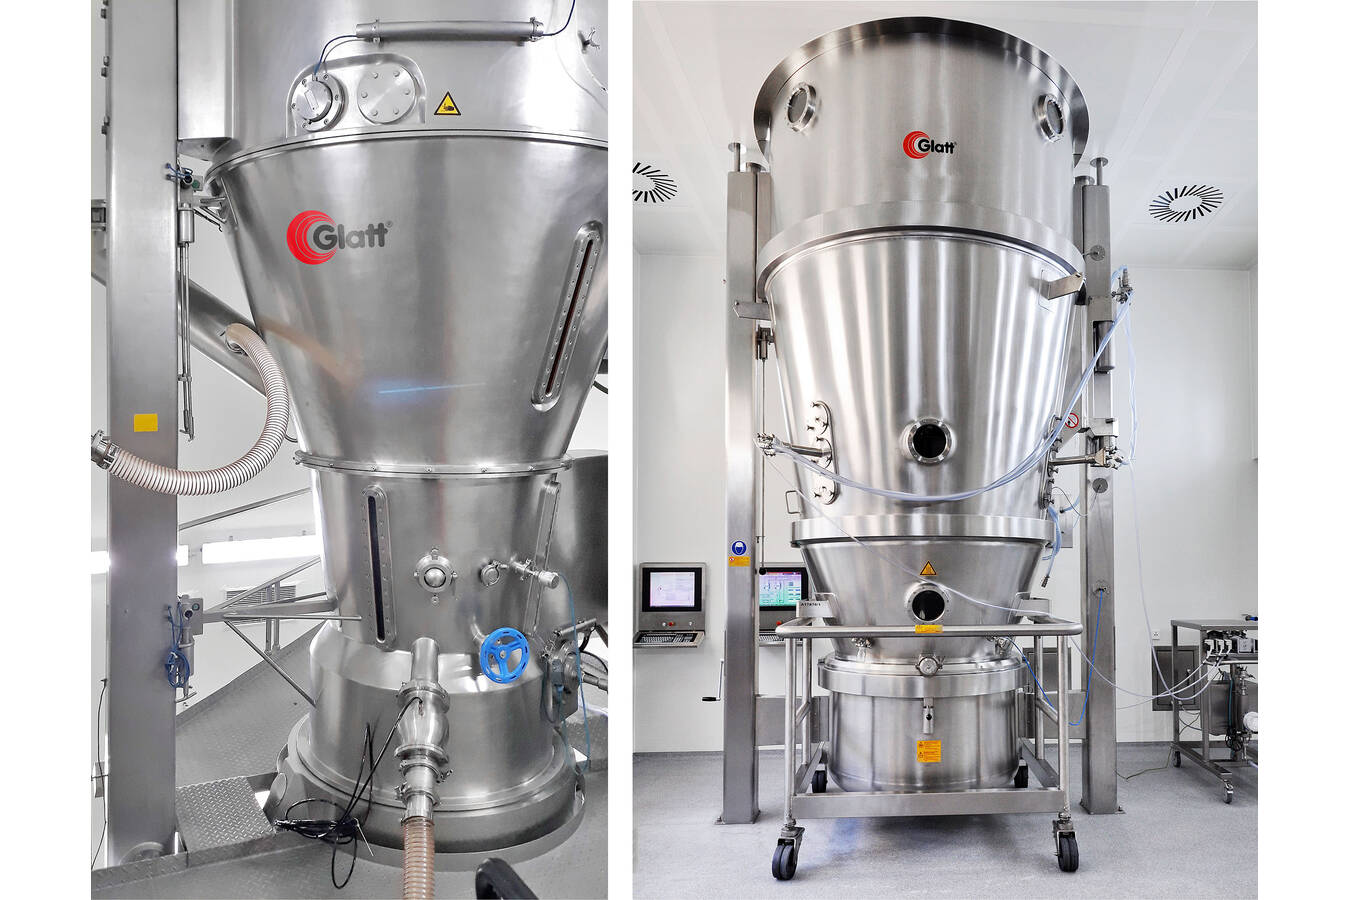 New fluid bed options for solvent-based processes  Glatt has expanded its range of services and capacities at the company’s Technology Centre in Weimar for trials and sample development